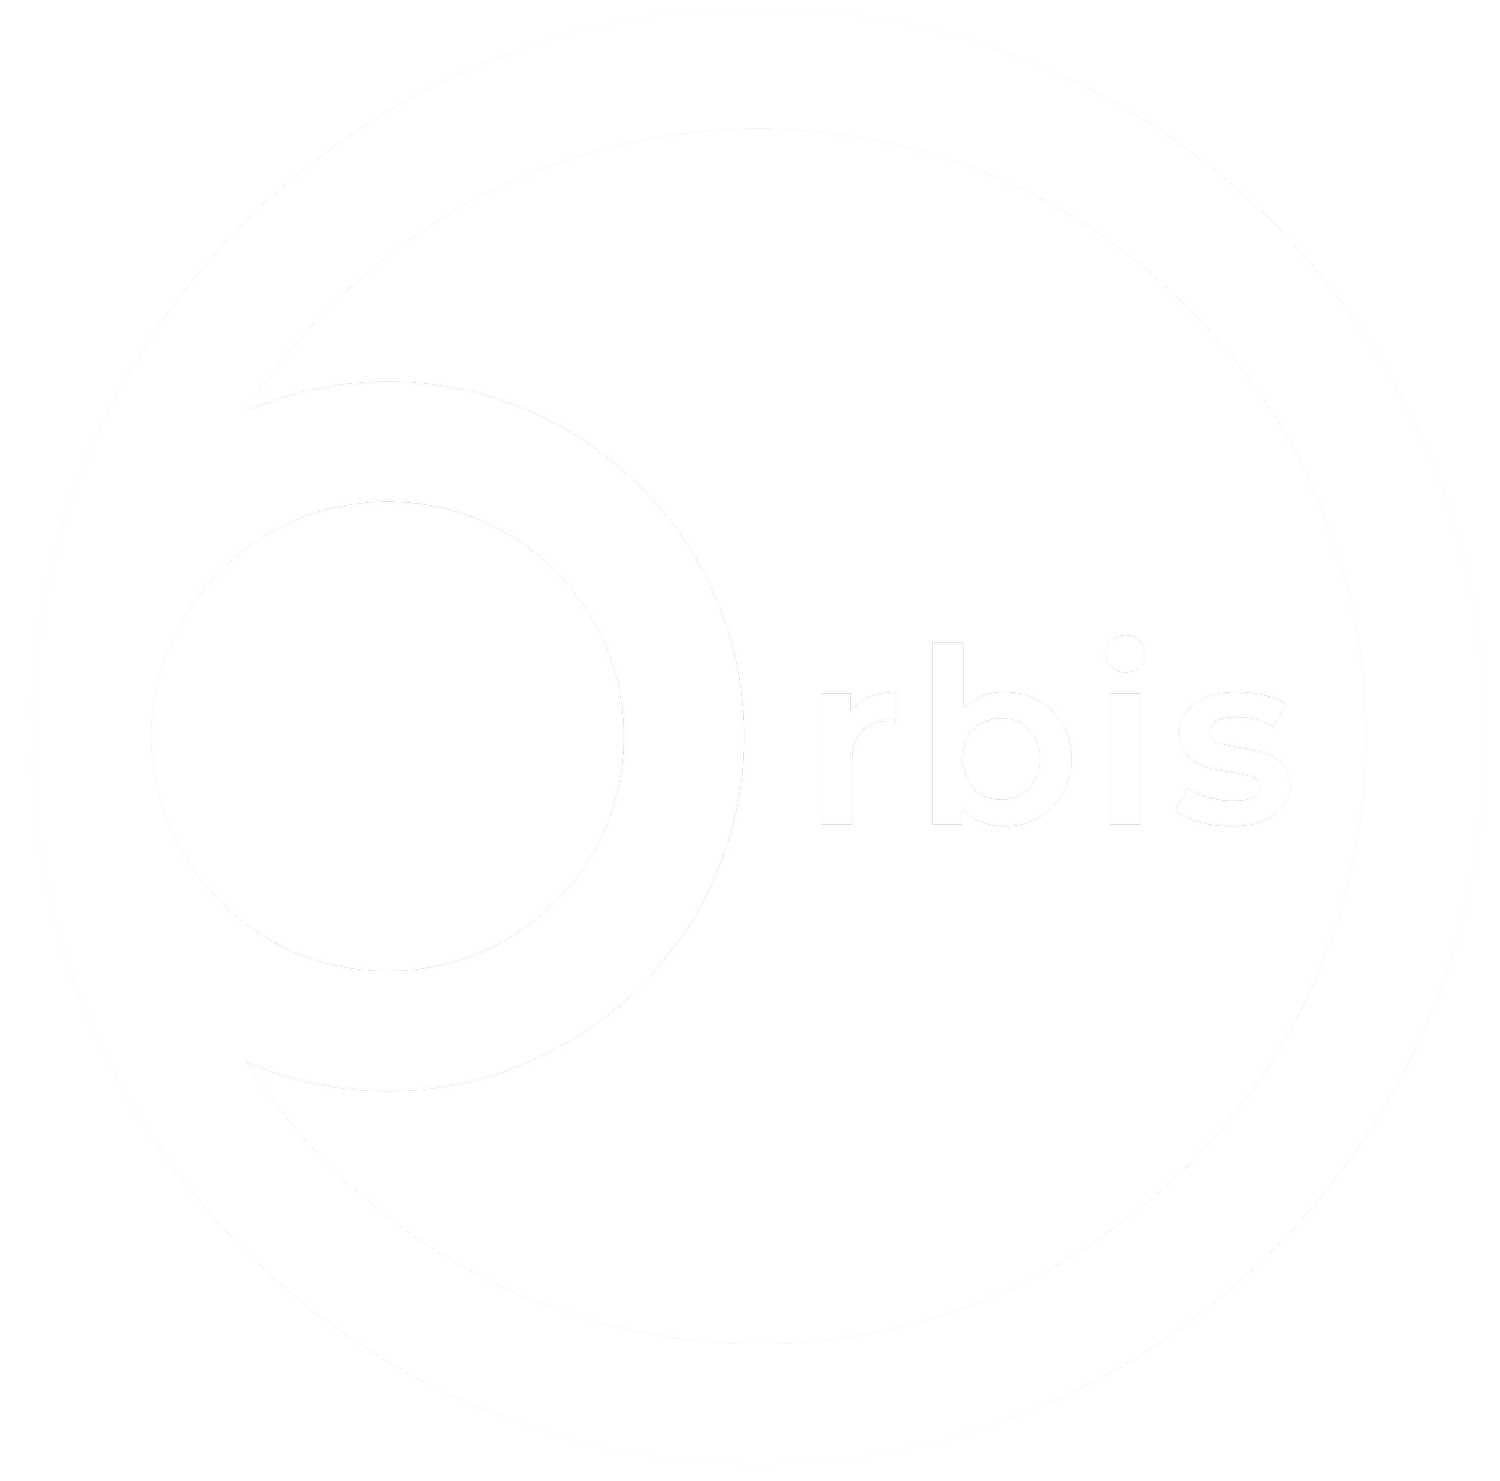 Orbis Digital Marketing for Small Business